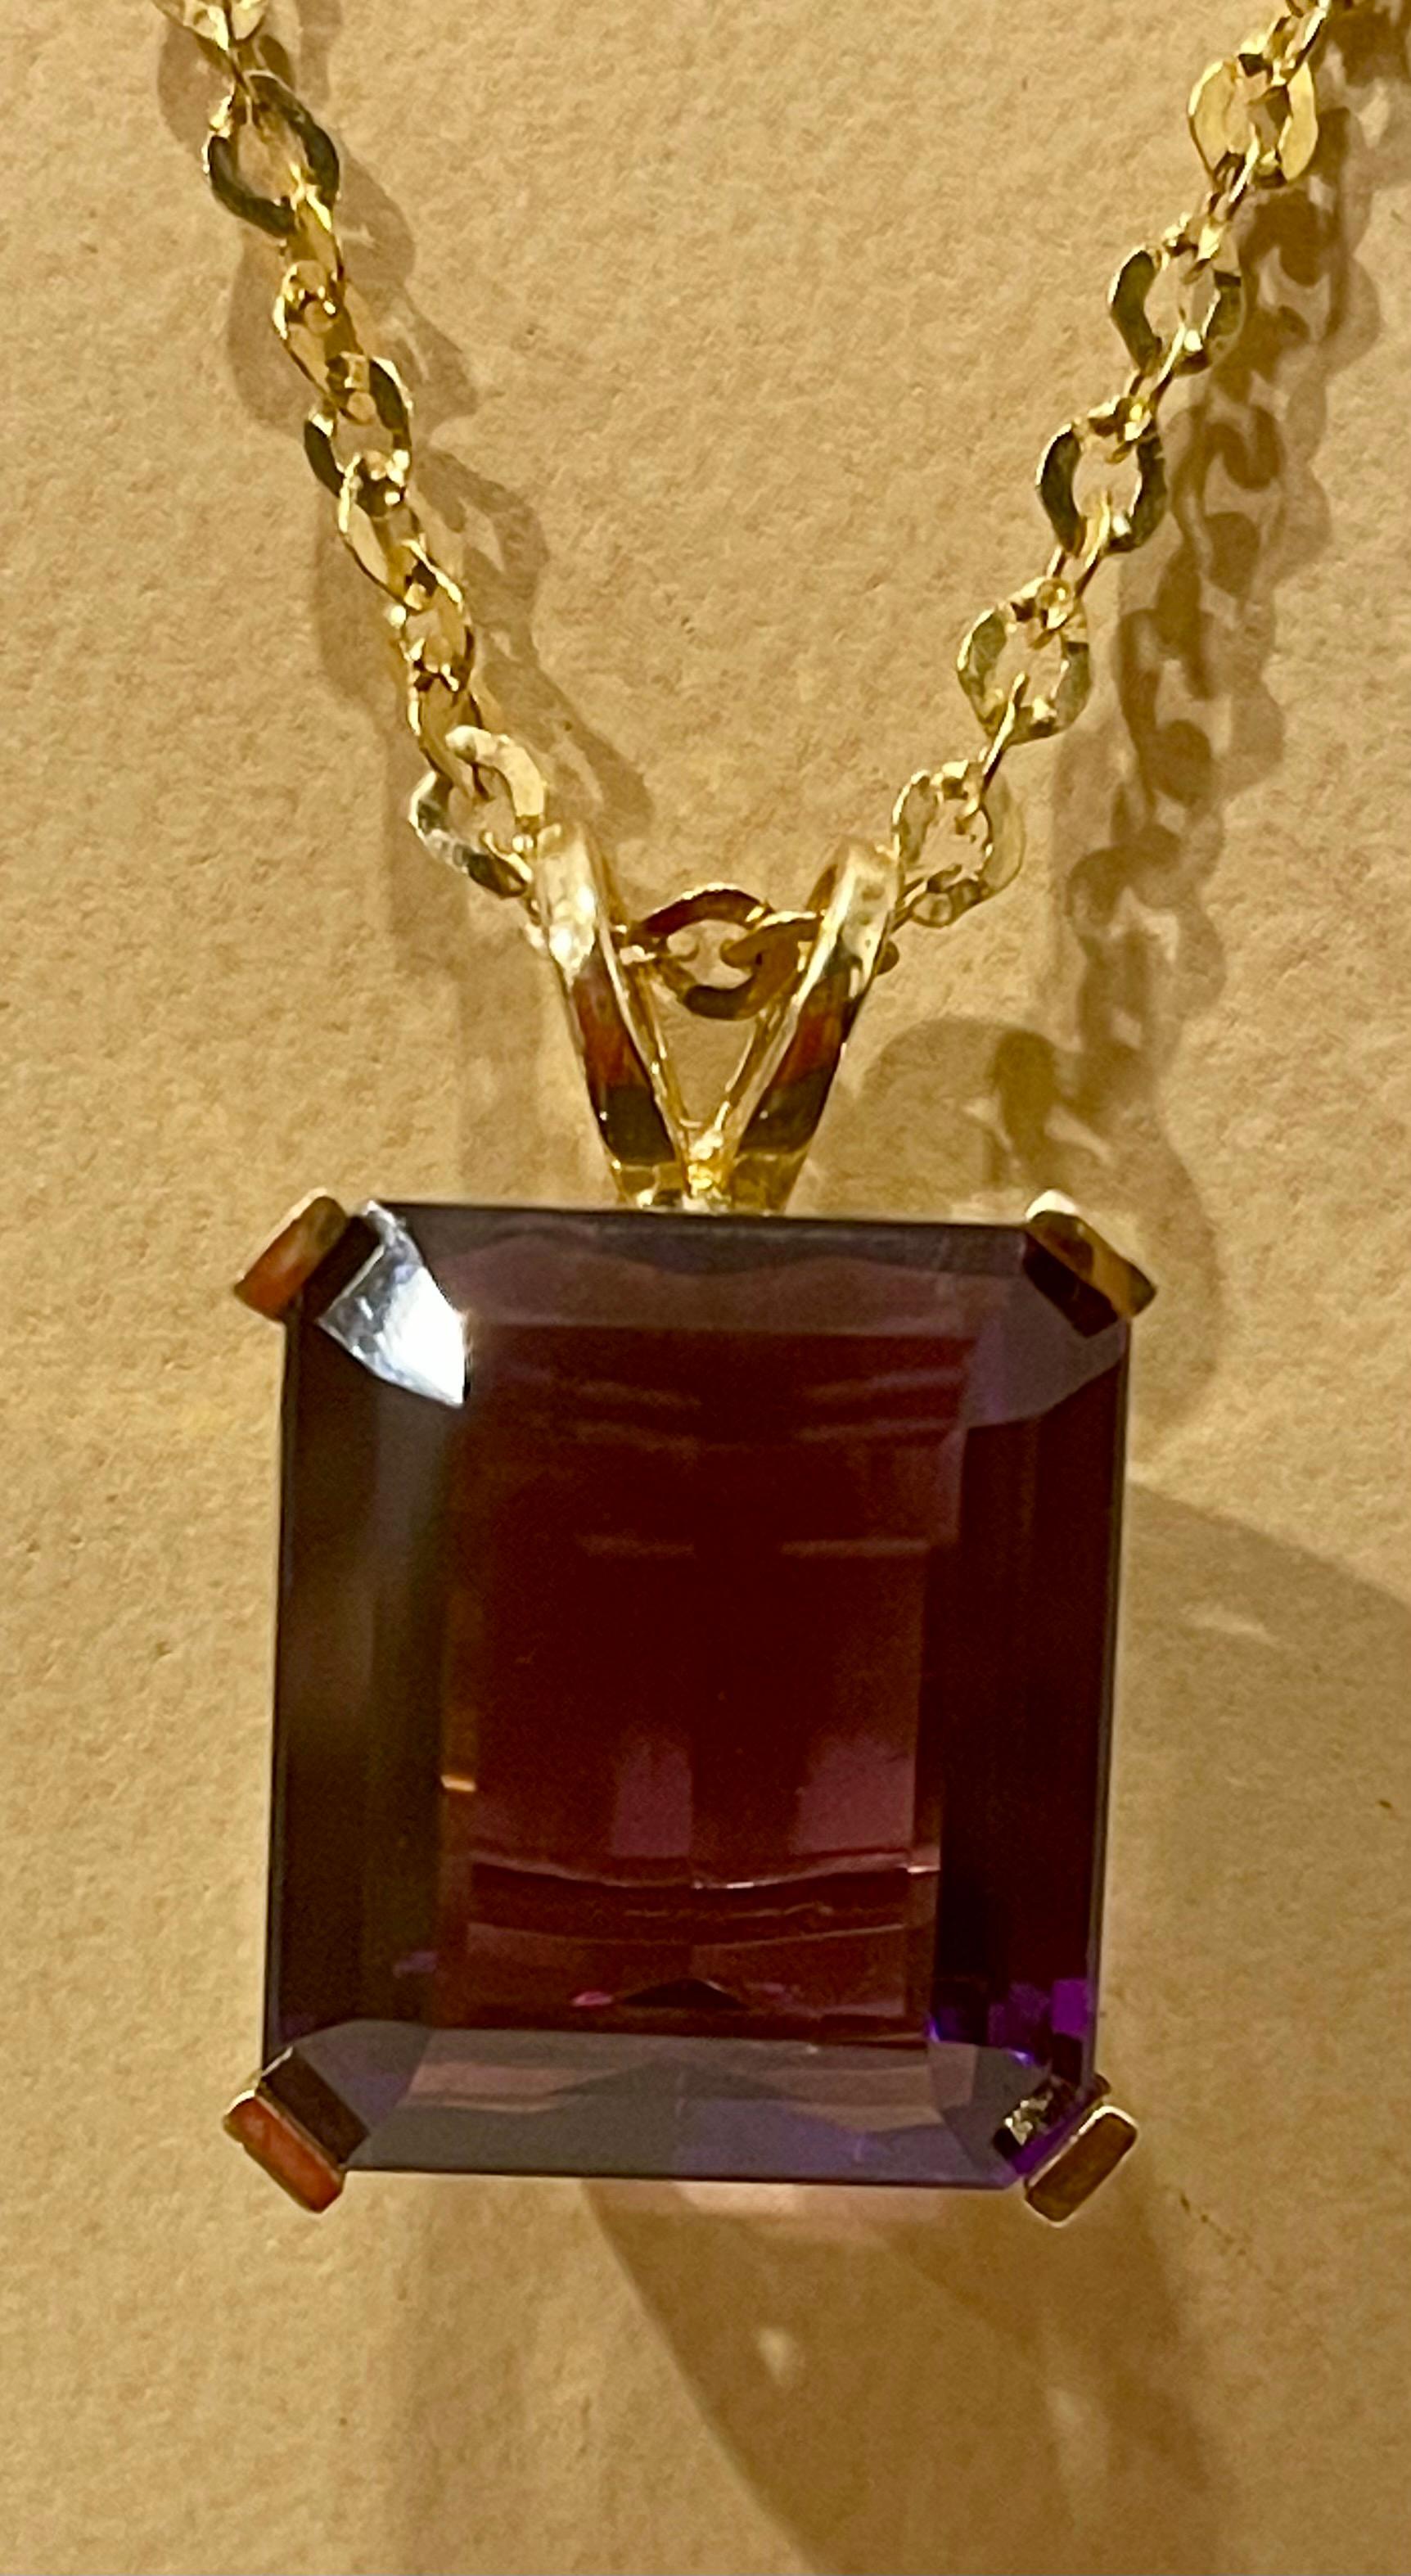  Approximately 42 Ct Emerald Cut Amethyst Pendant /Necklace + 14 Kt Yellow Gold Chain Vintage
Chain is made in Turkey and there is stamp of turkey and 14 K
This spectacular Pendant Necklace  consisting of a single large Emerald  Cut Amethyst ,